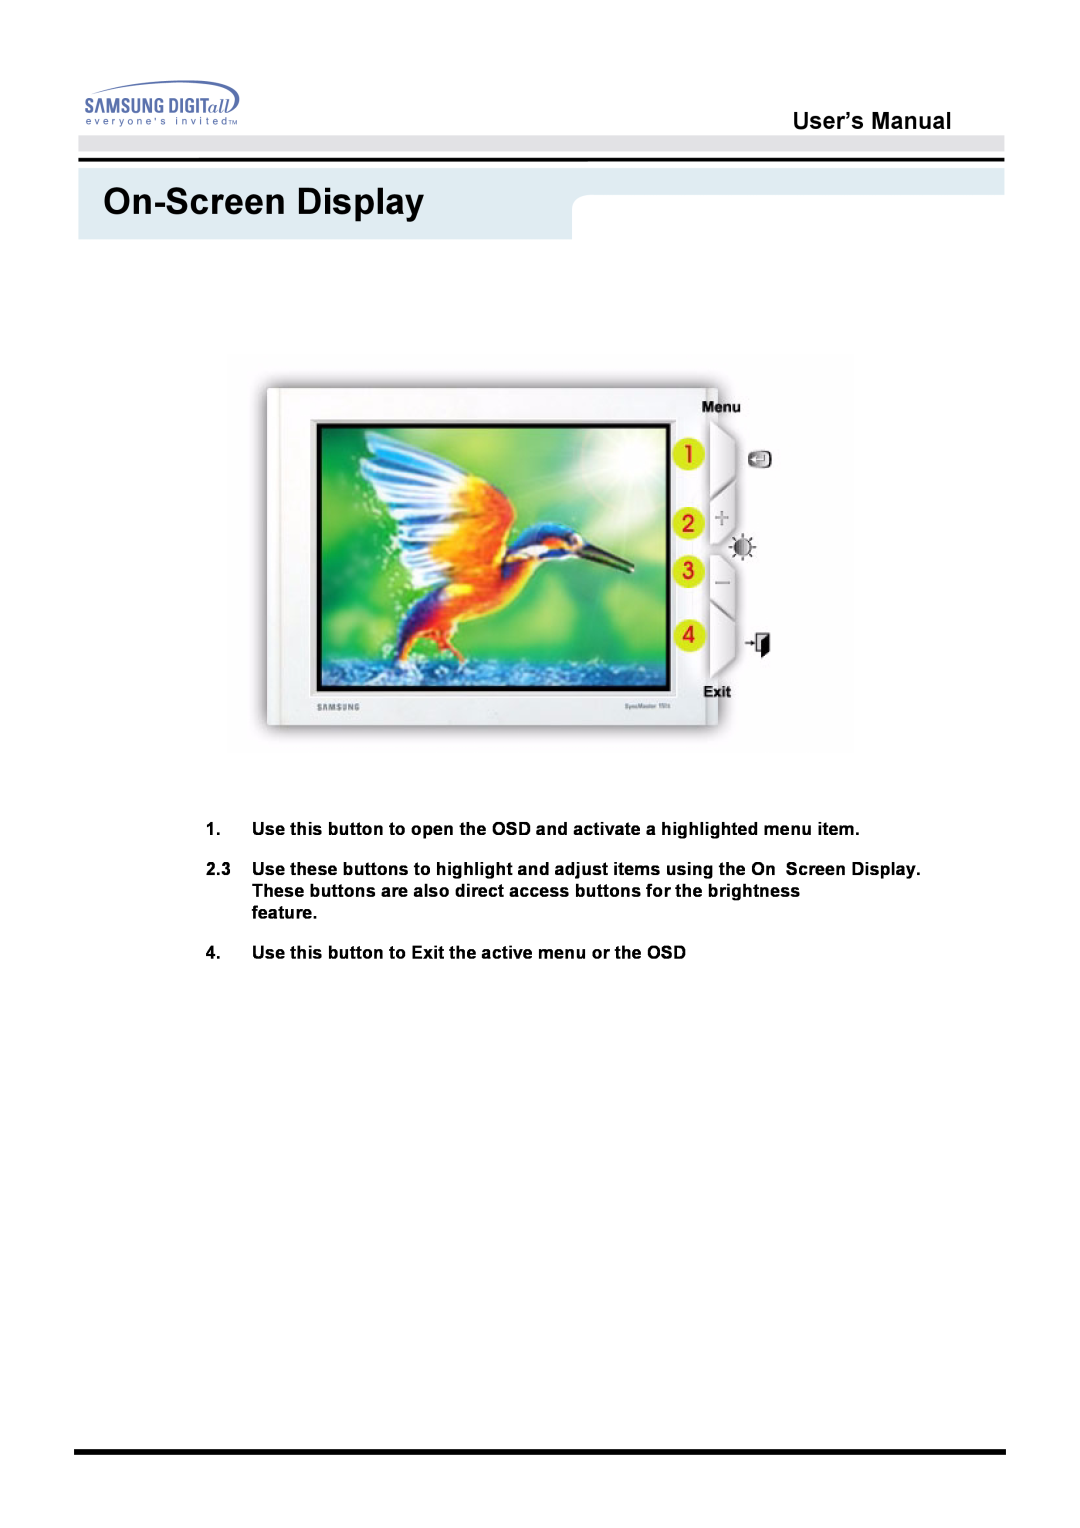 Samsung 151D user manual On-Screen Display, User’s Manual, feature 4. Use this button to Exit the active menu or the OSD 